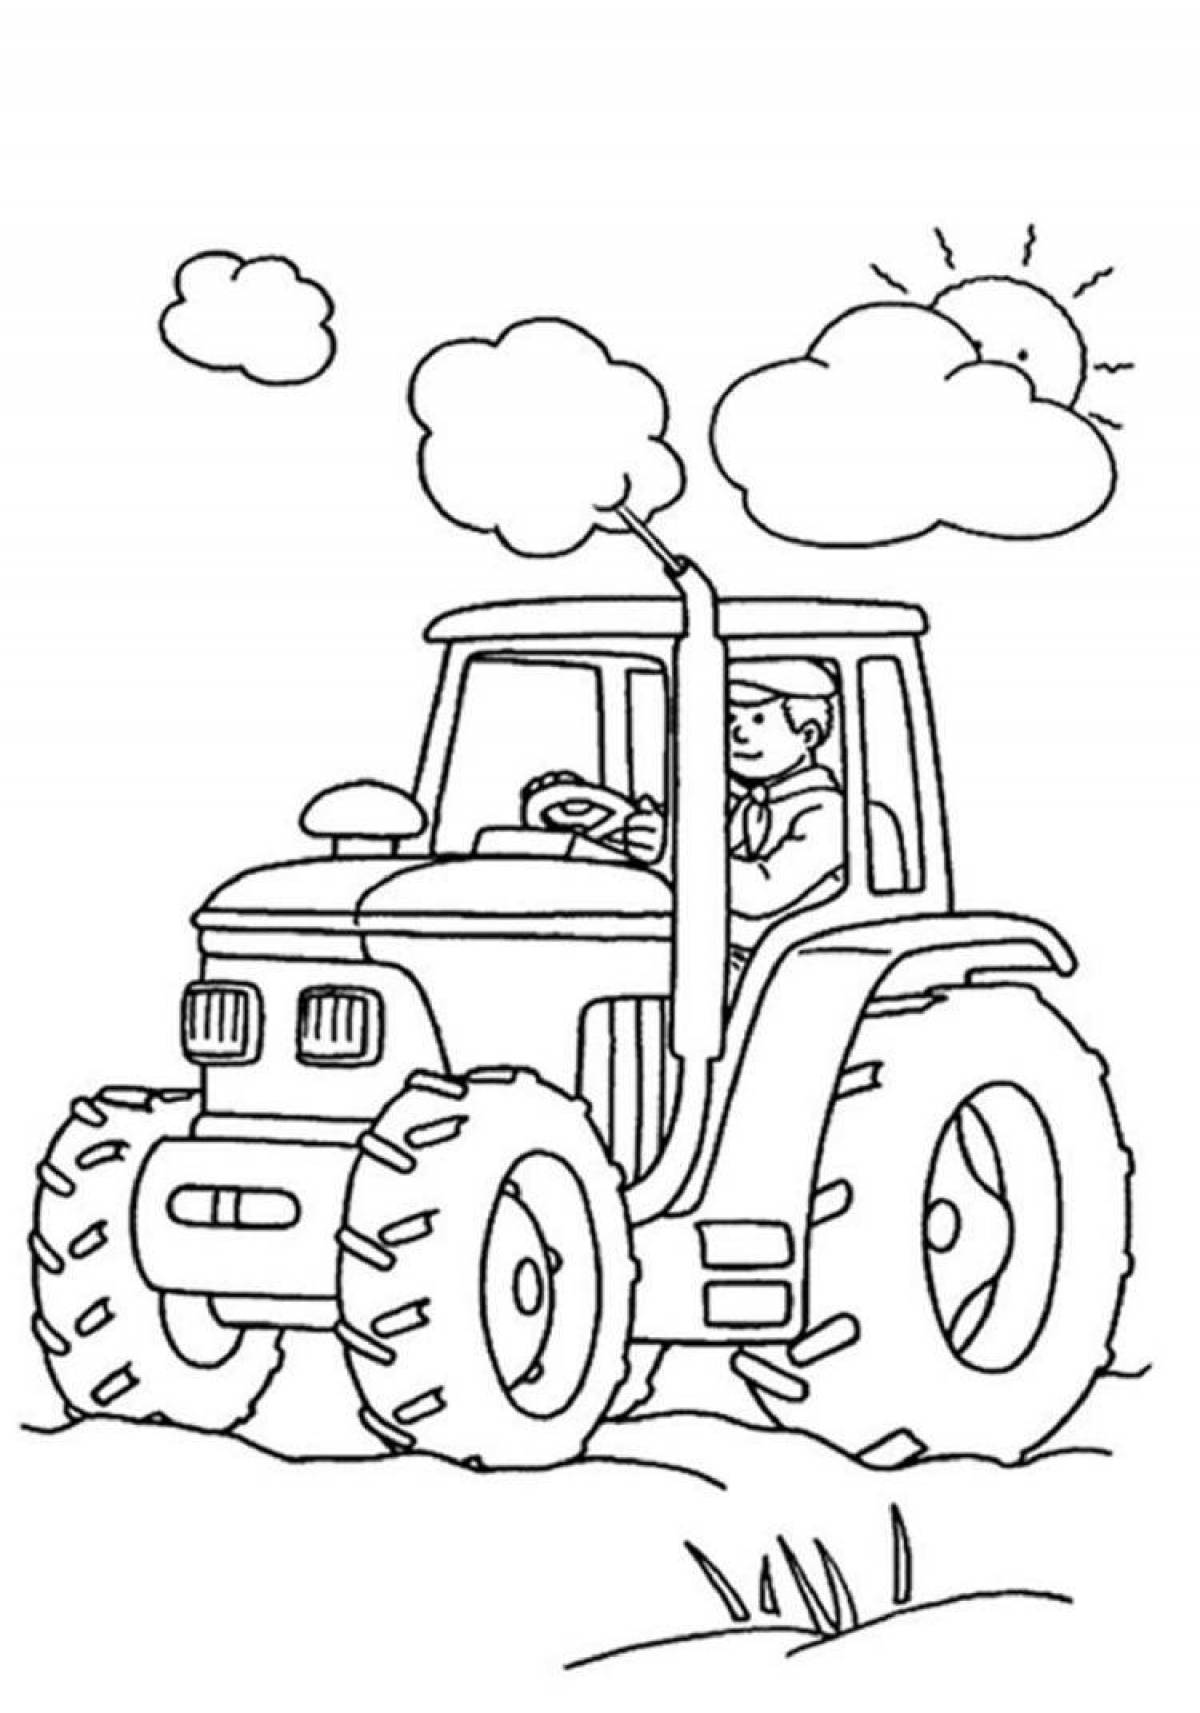 Charming tractor t 150 coloring book